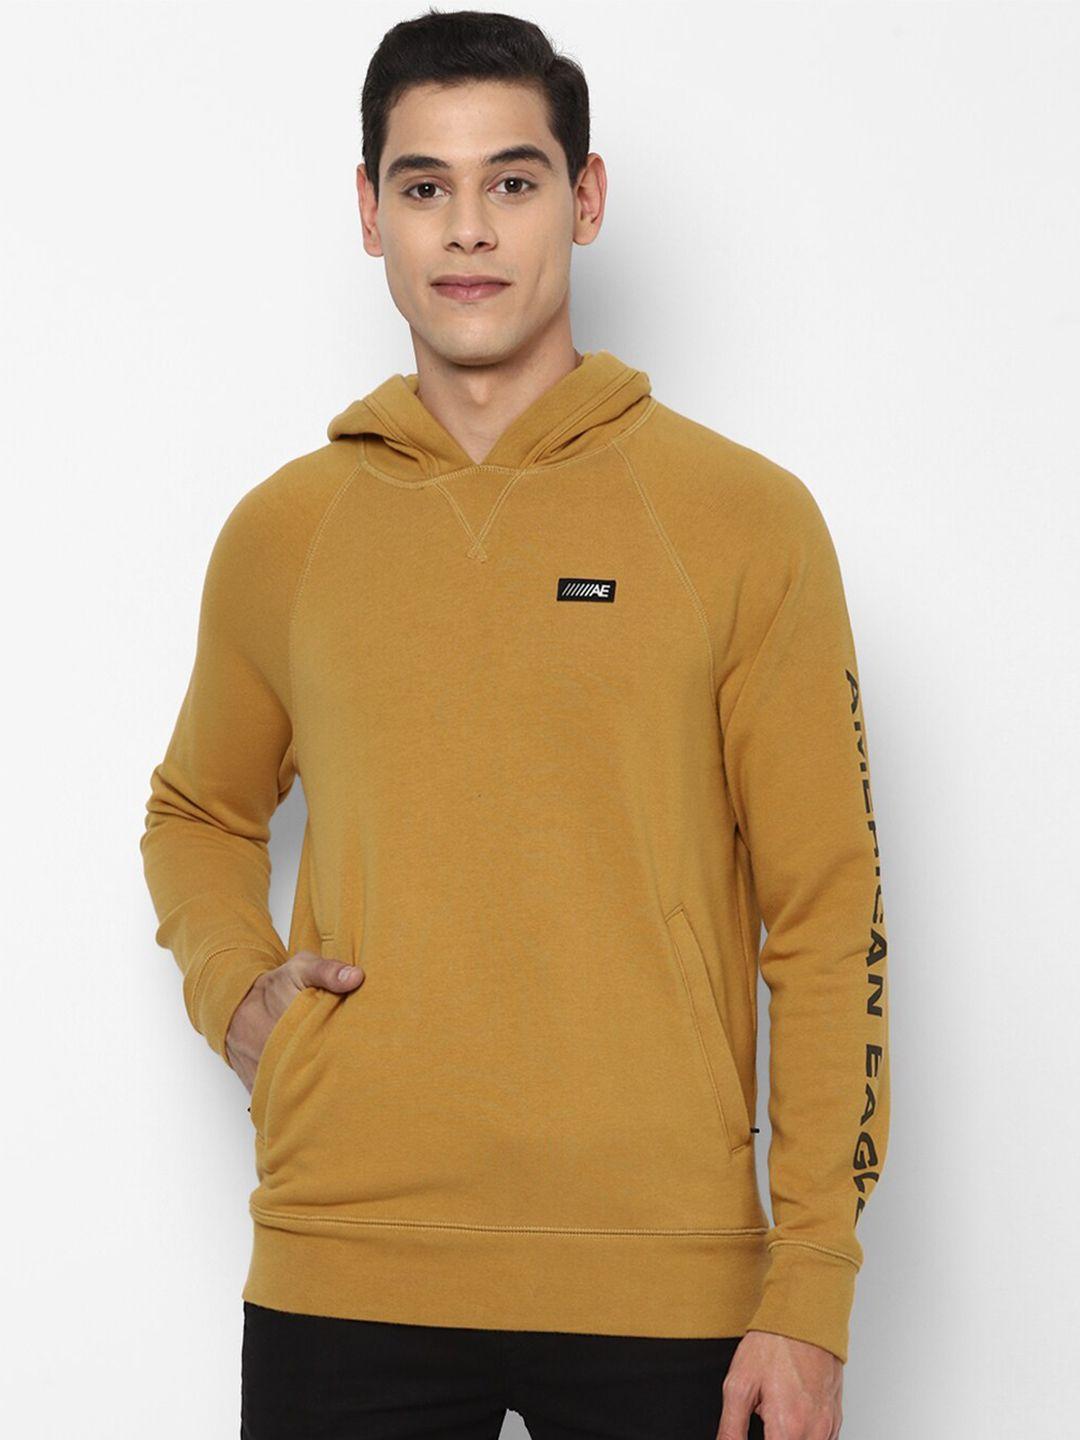 american eagle outfitters men yellow hooded sweatshirt